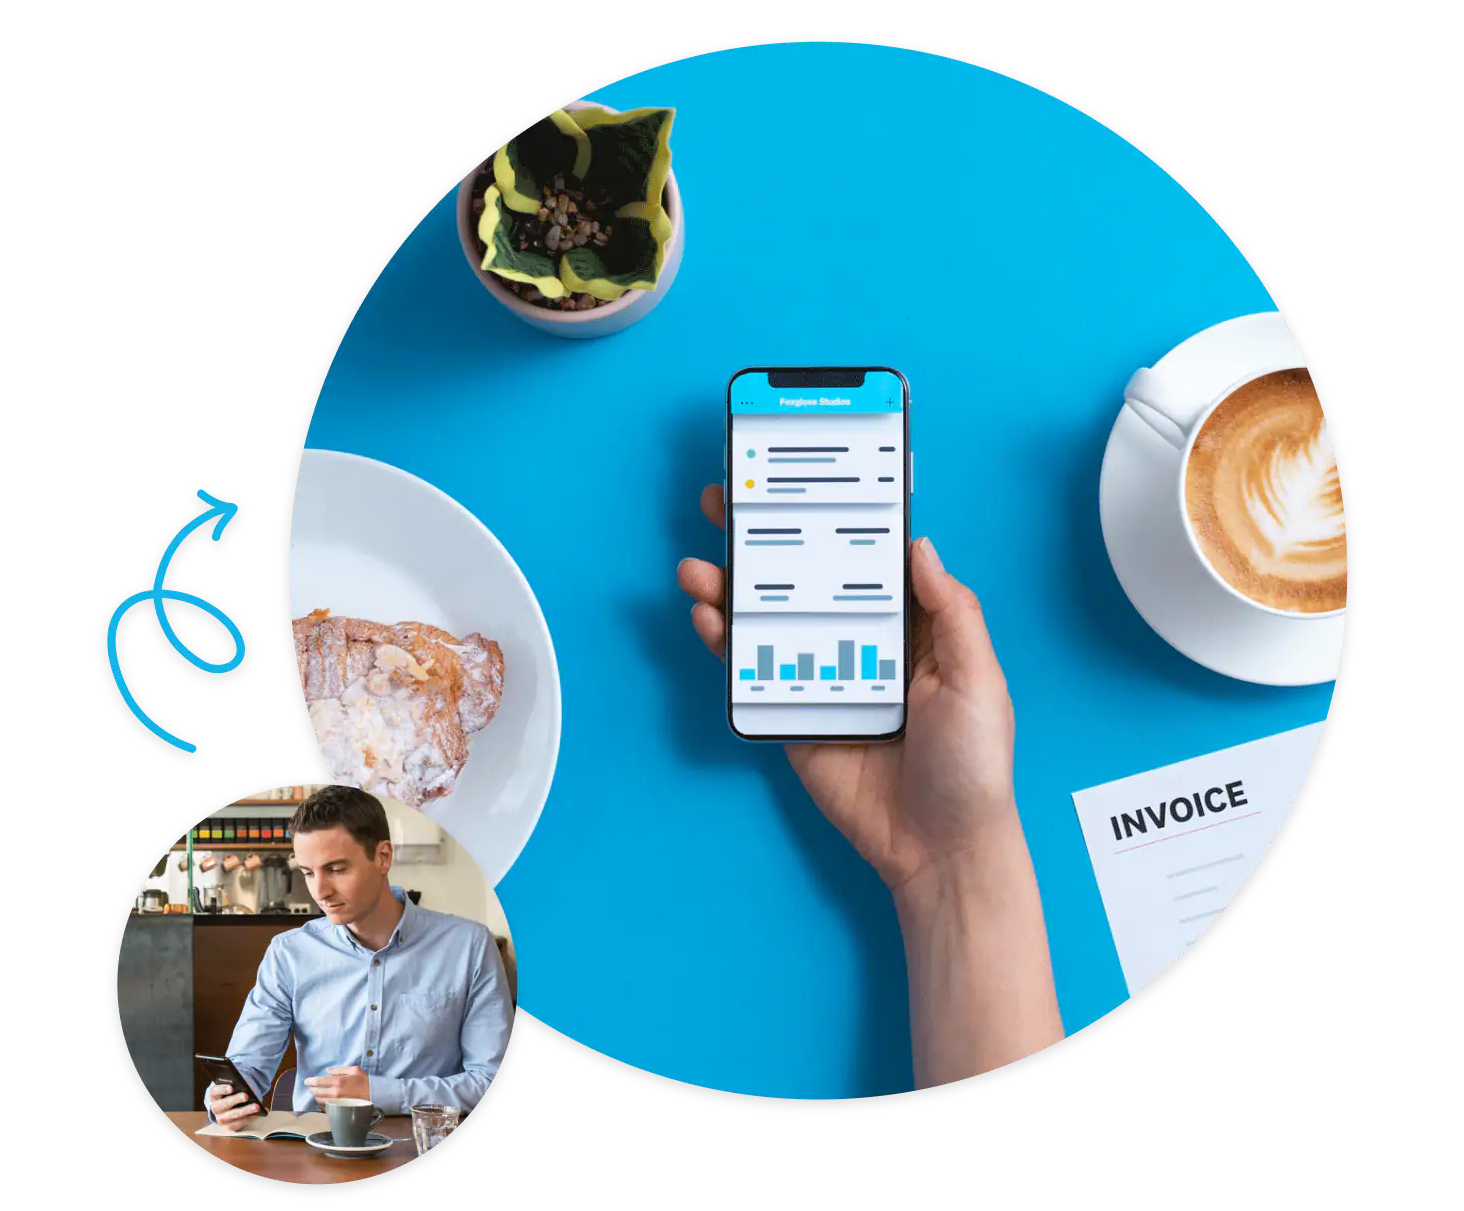 Small business owner sips coffee while using the invoice app for Android and iPhone to check payments received.